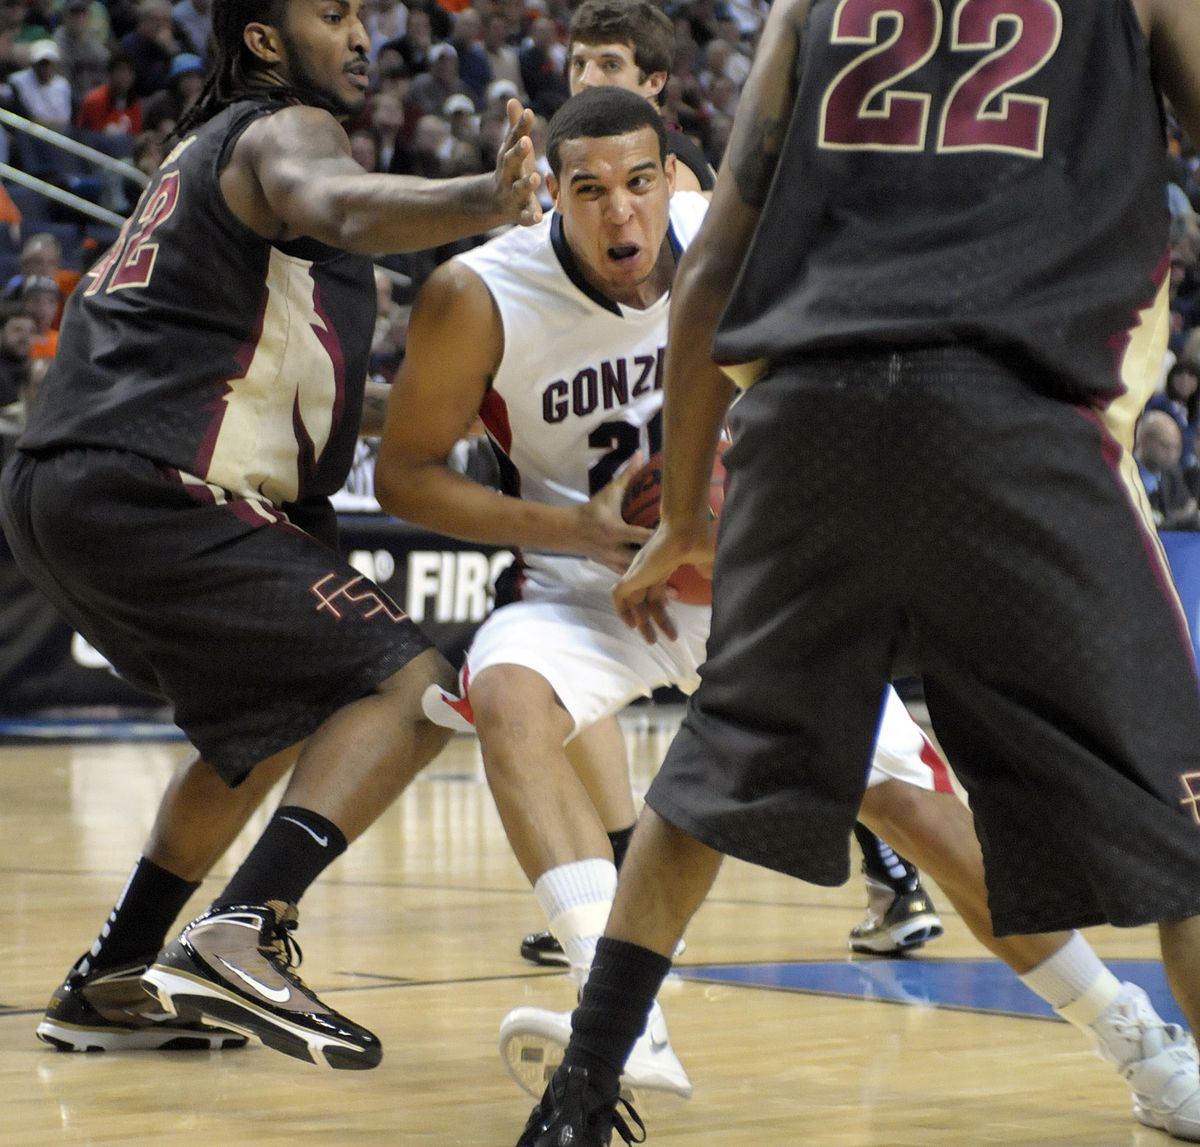 Gonzaga’s Elias Harris drives to the basket against Florida State defender Ryan Reid during the second half.